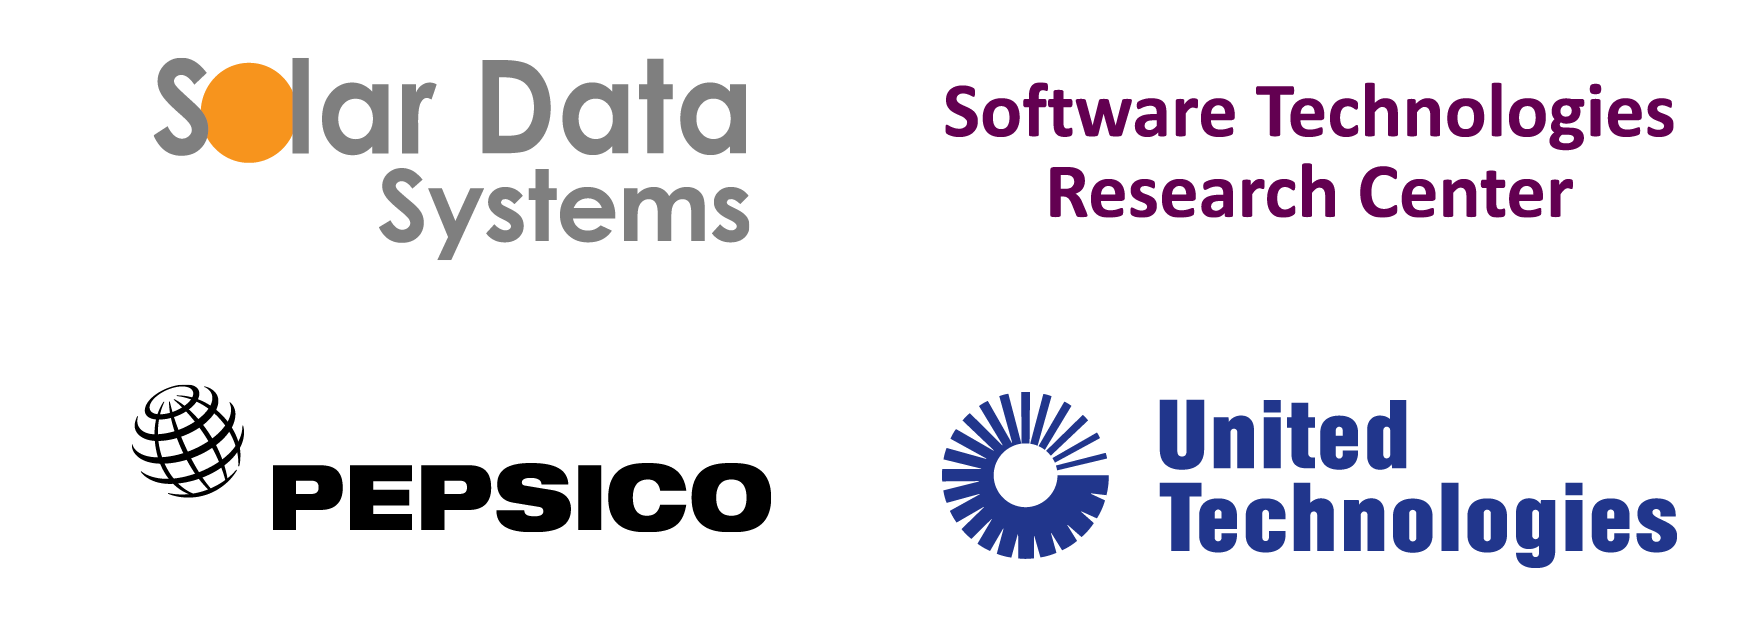 Logos of Computer Science career destinations: Solar Data Systems, Inc., Software Technologies Research Center, PepsiCo, and United Technologies